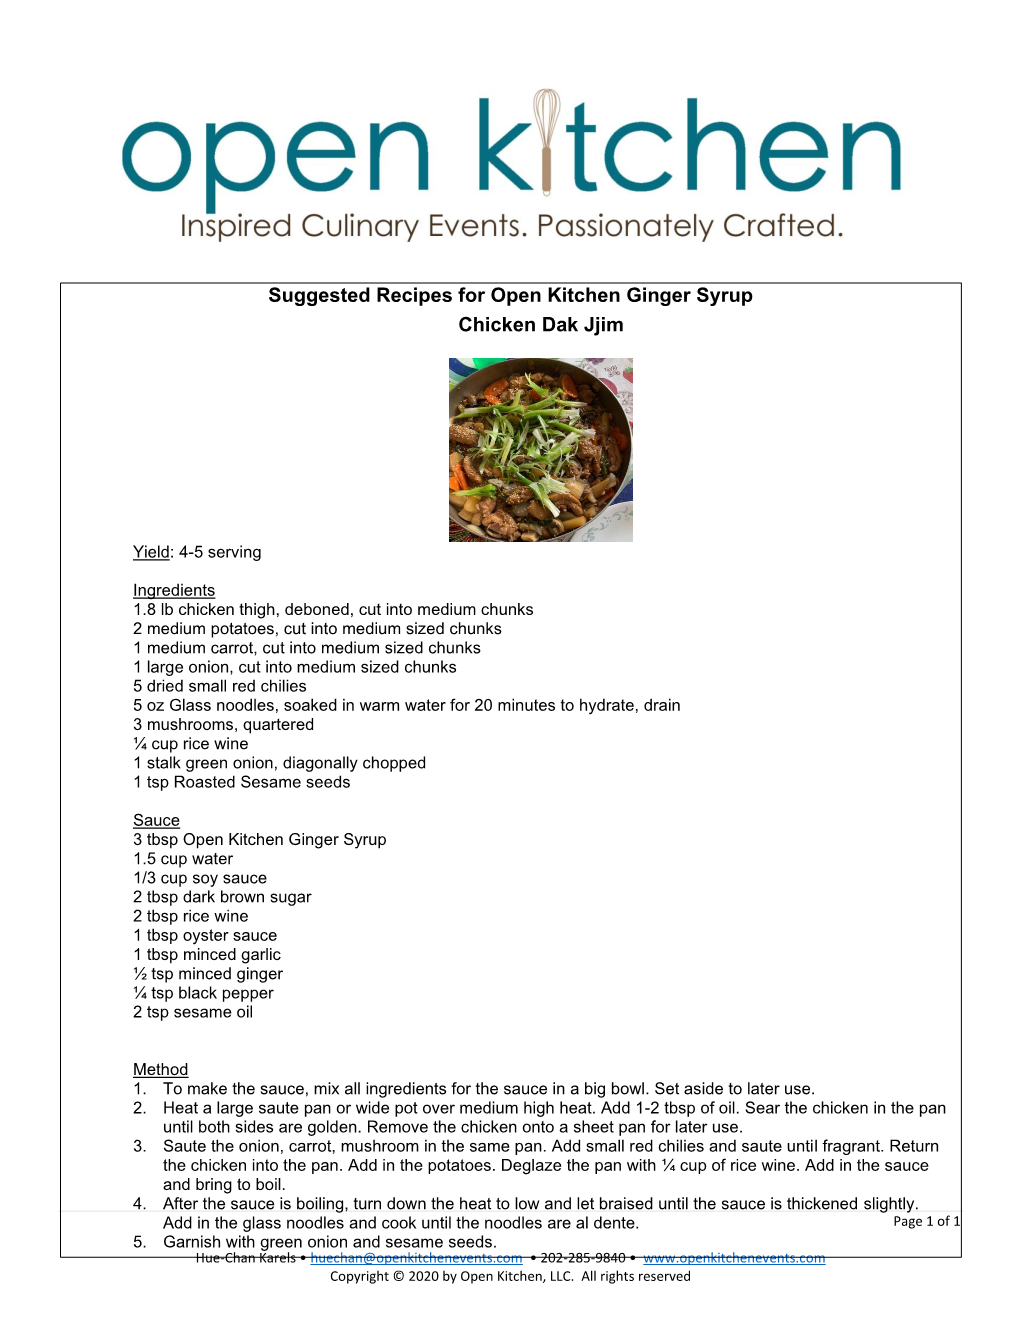 Suggested Recipes for Open Kitchen Ginger Syrup Chicken Dak Jjim